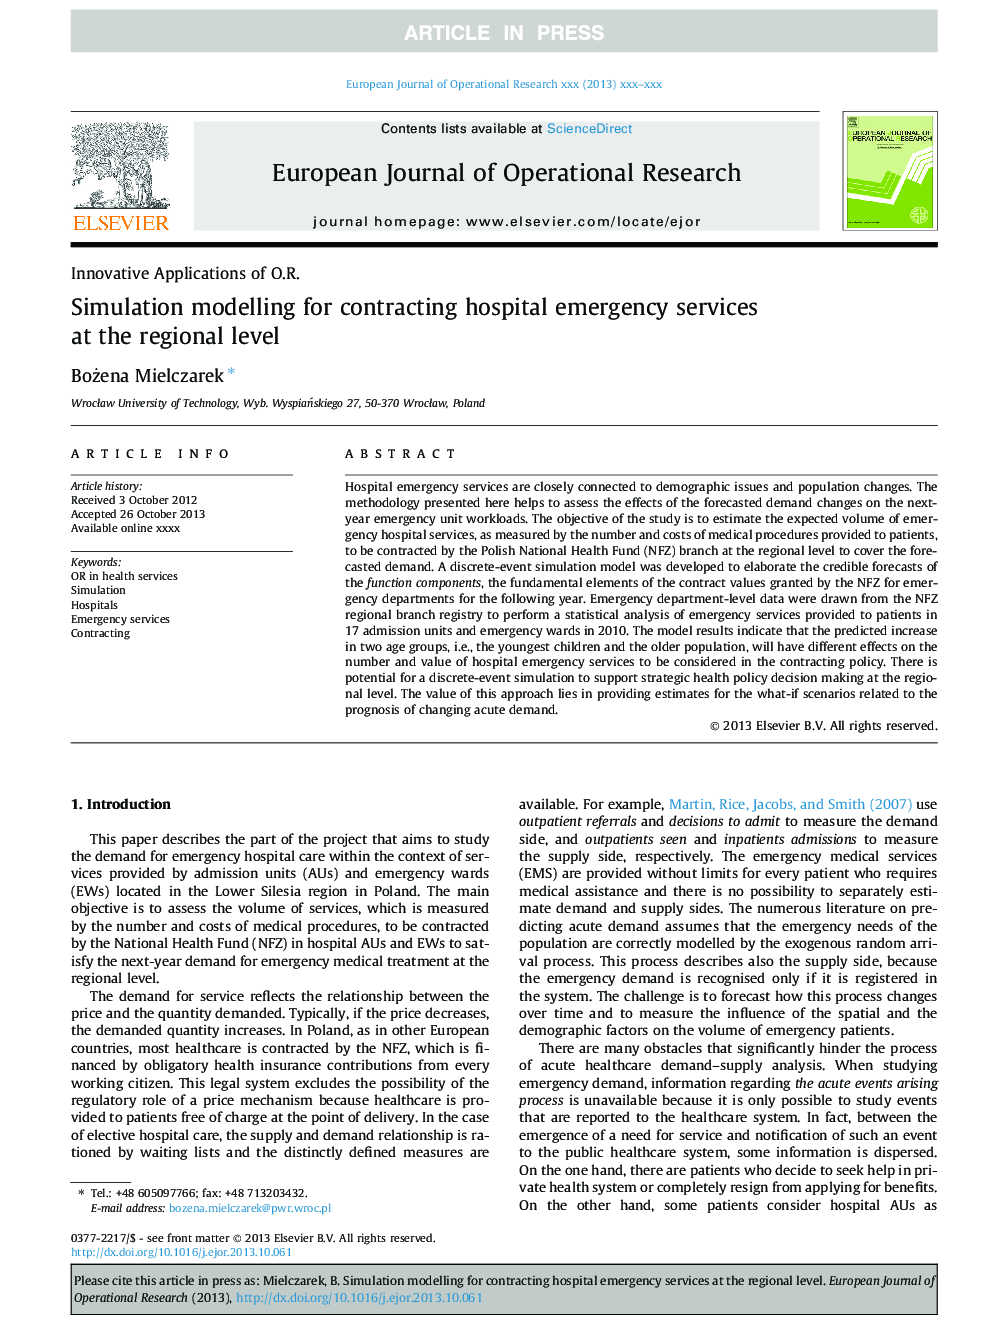 Simulation modelling for contracting hospital emergency services at the regional level